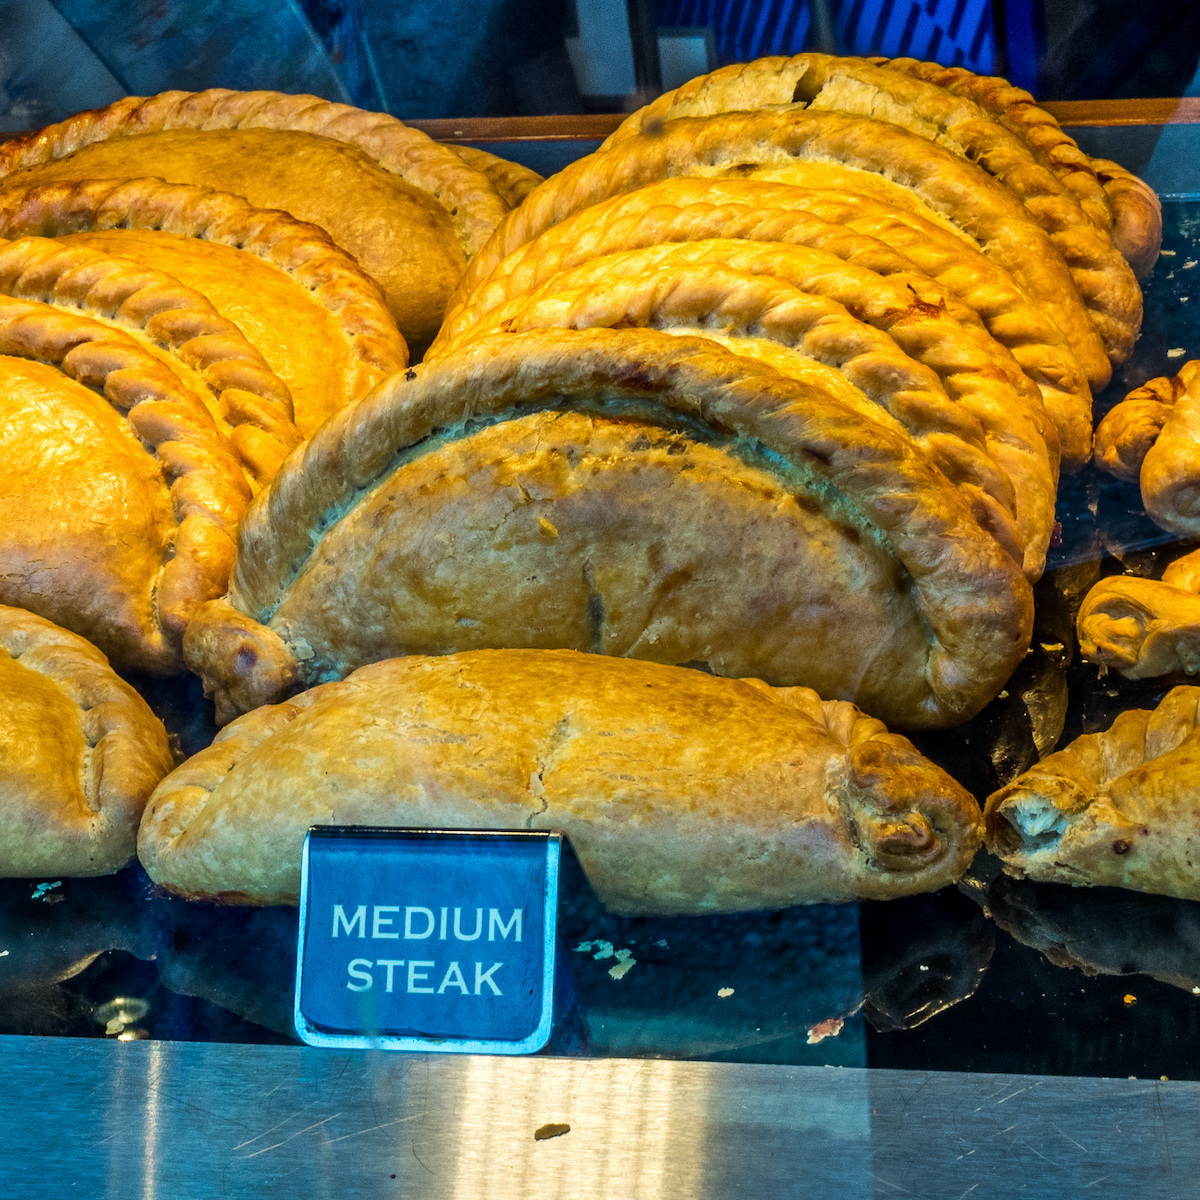 Cornish pasties for sale at a bakery